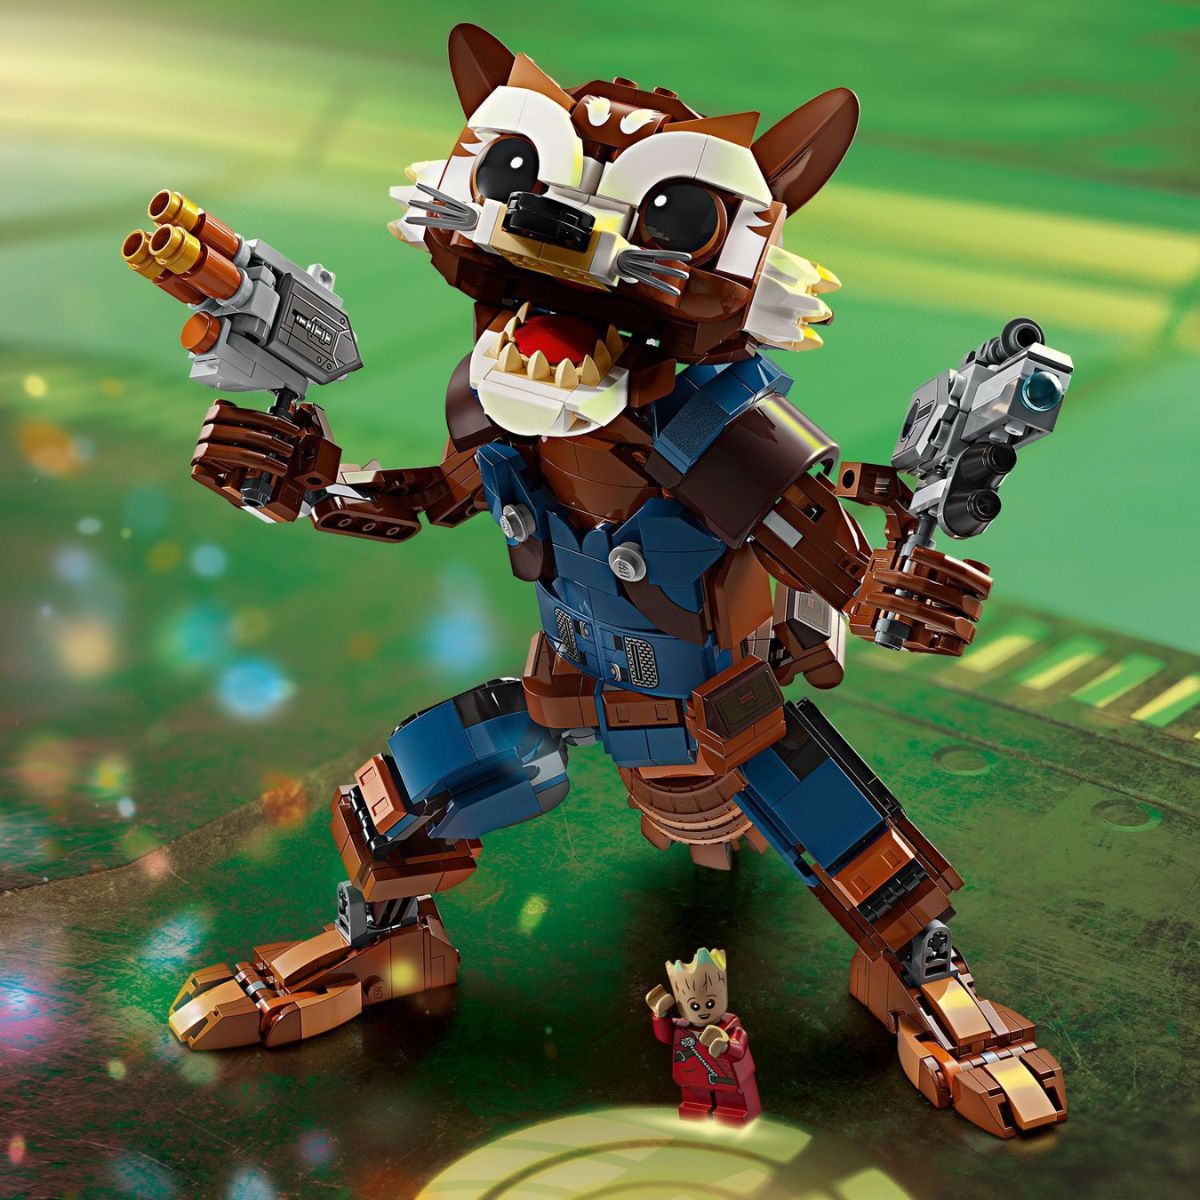 Marvel rocket raccoon building set with rocket armed with blasters and a baby froot minifigure